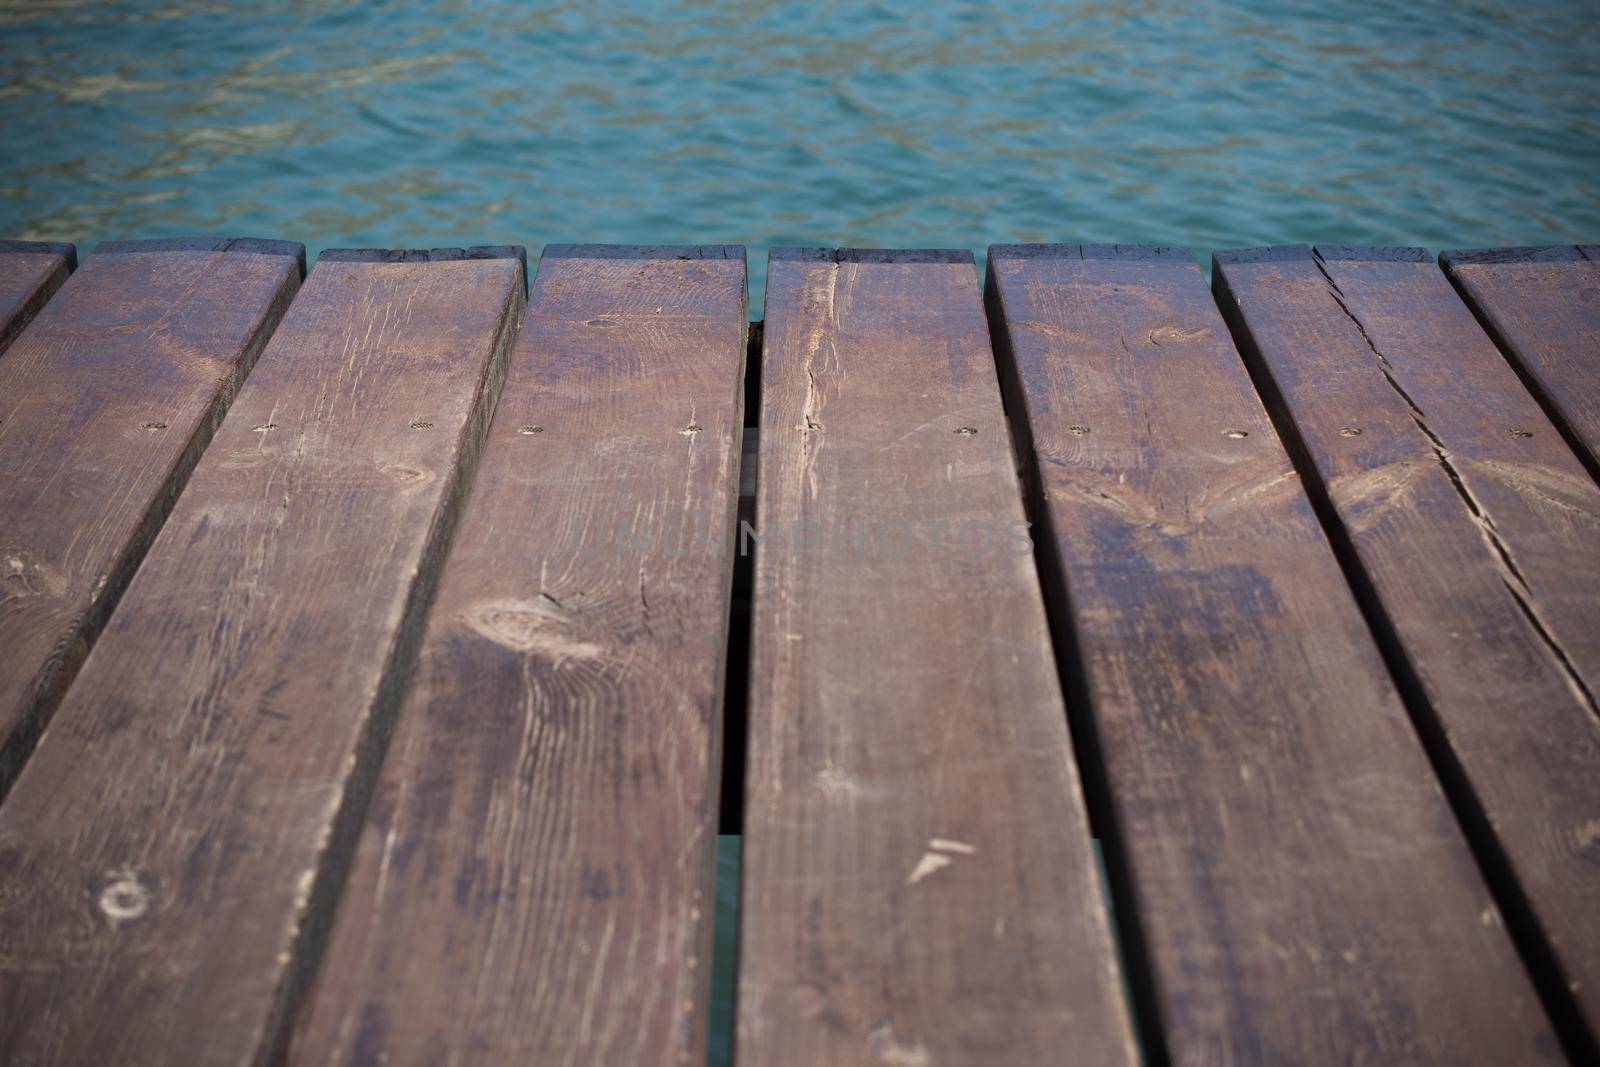 Empty wooden jetty on the lake shore